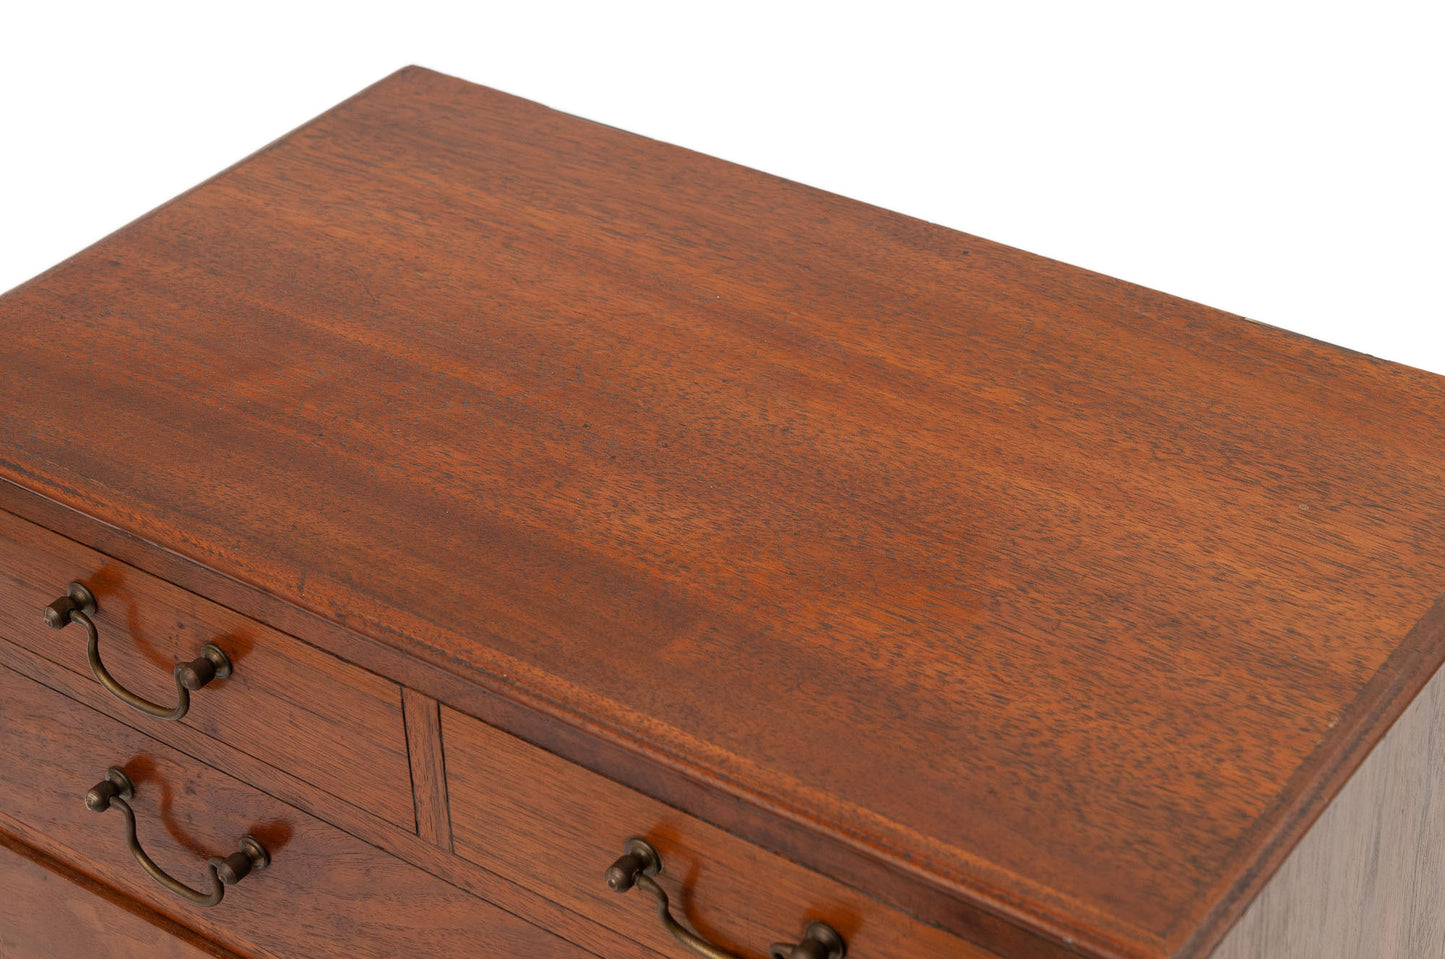 Antique Victorian/Edwardian Mahogany Wood Chest of Drawers Sewing/Jewellery Box (Code 1510)